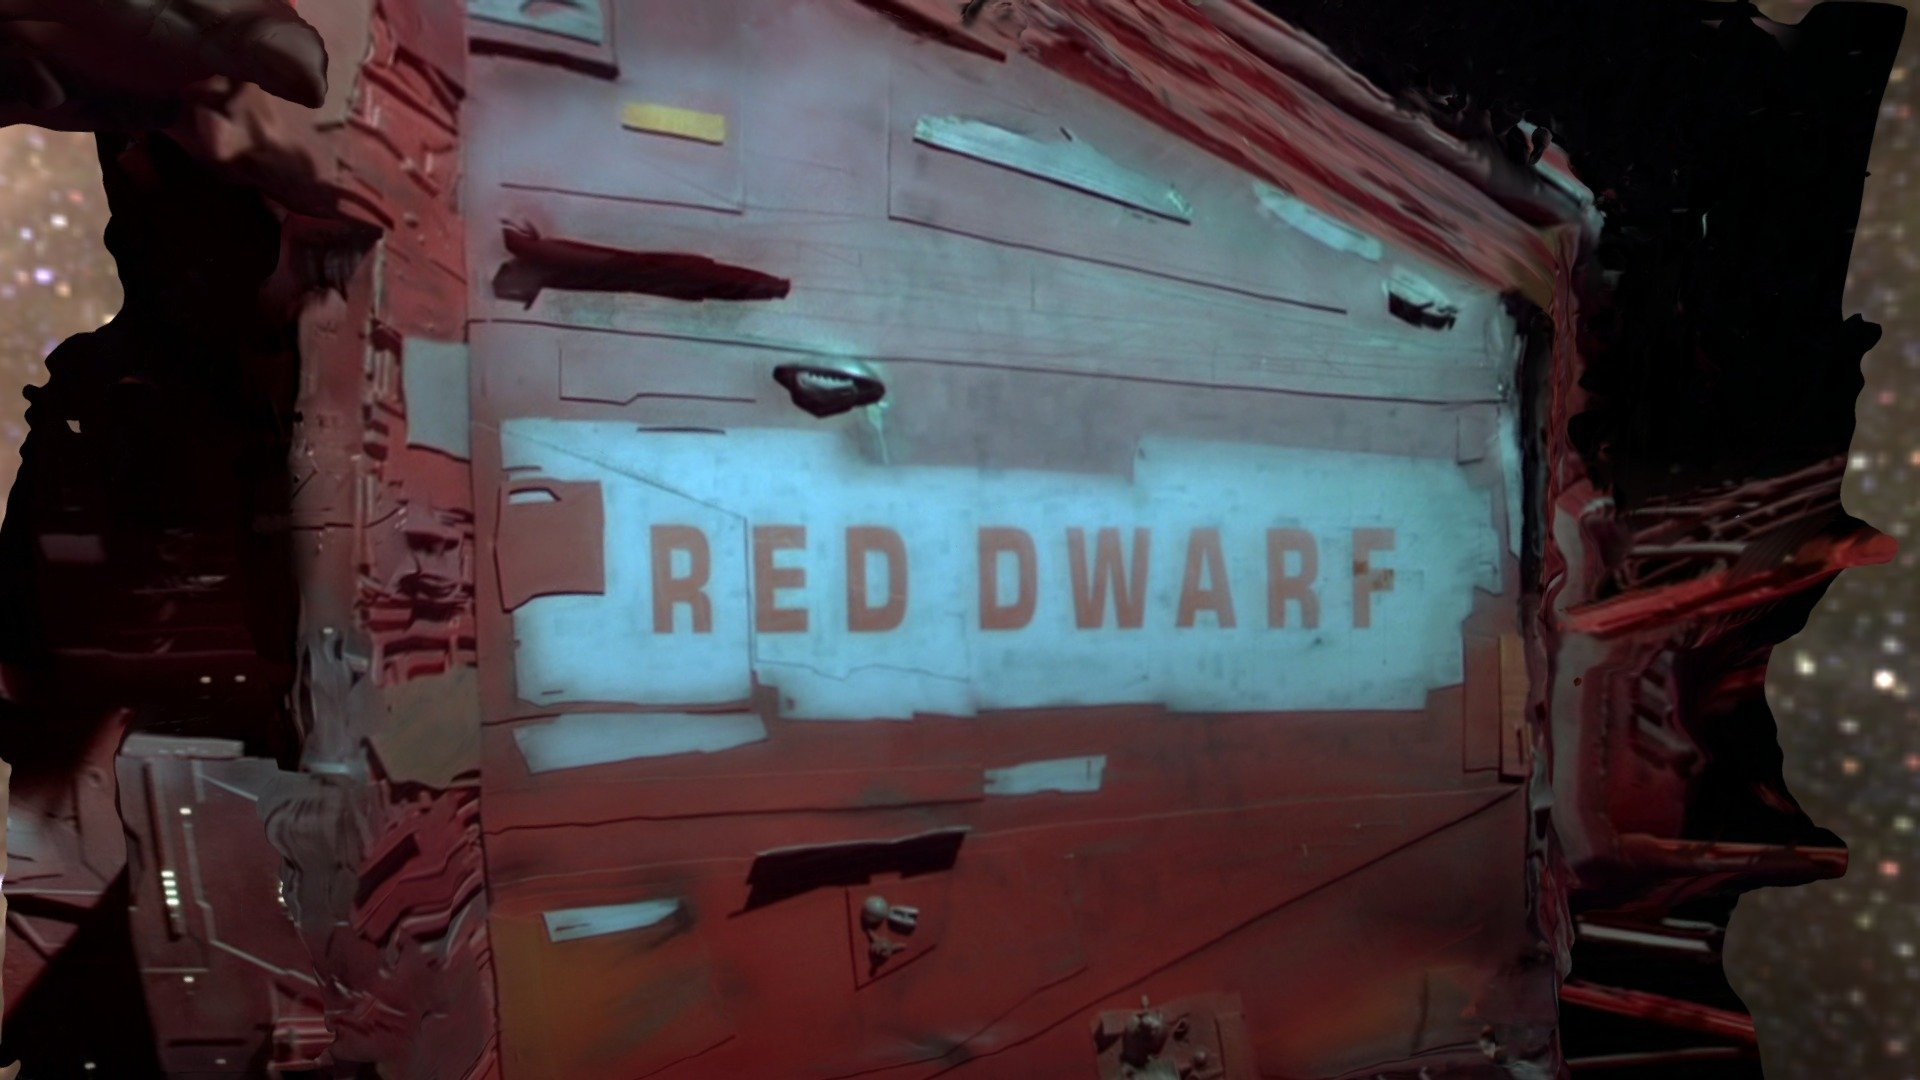 1920x1080 Red Dwarf 3D model by electrongap (@electrongap) [abff8ce